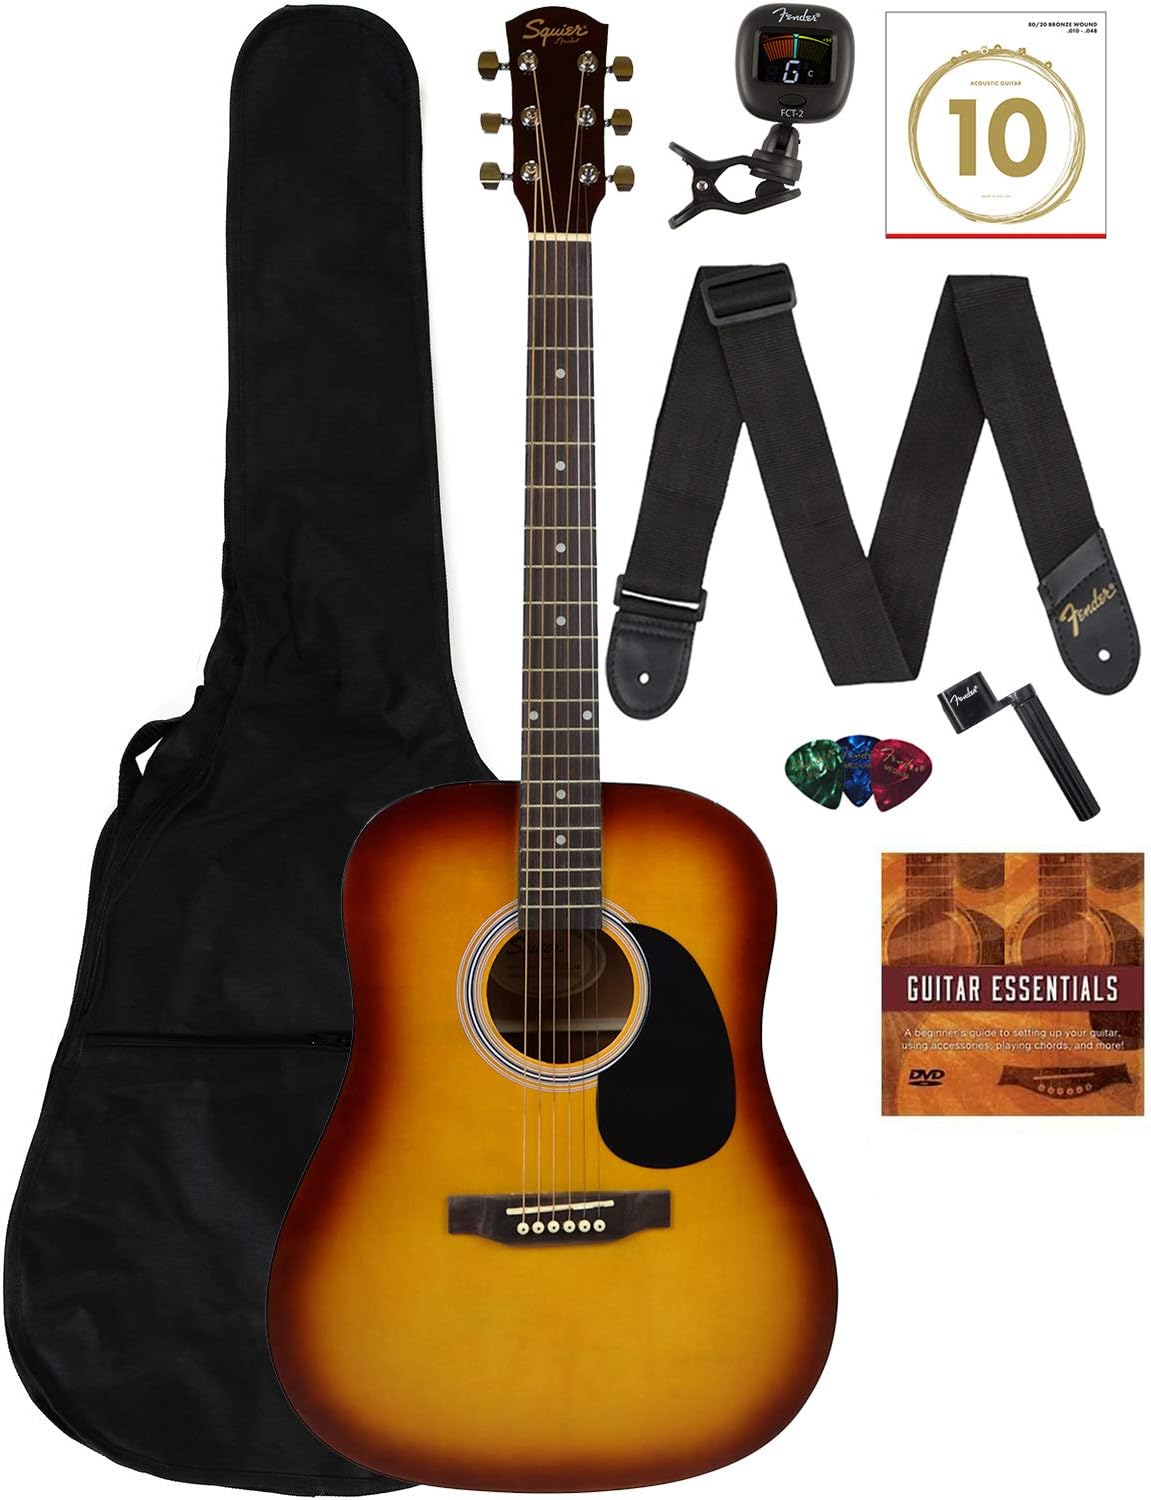 Fender Squier Dreadnought Acoustic Guitar Pack on a white background